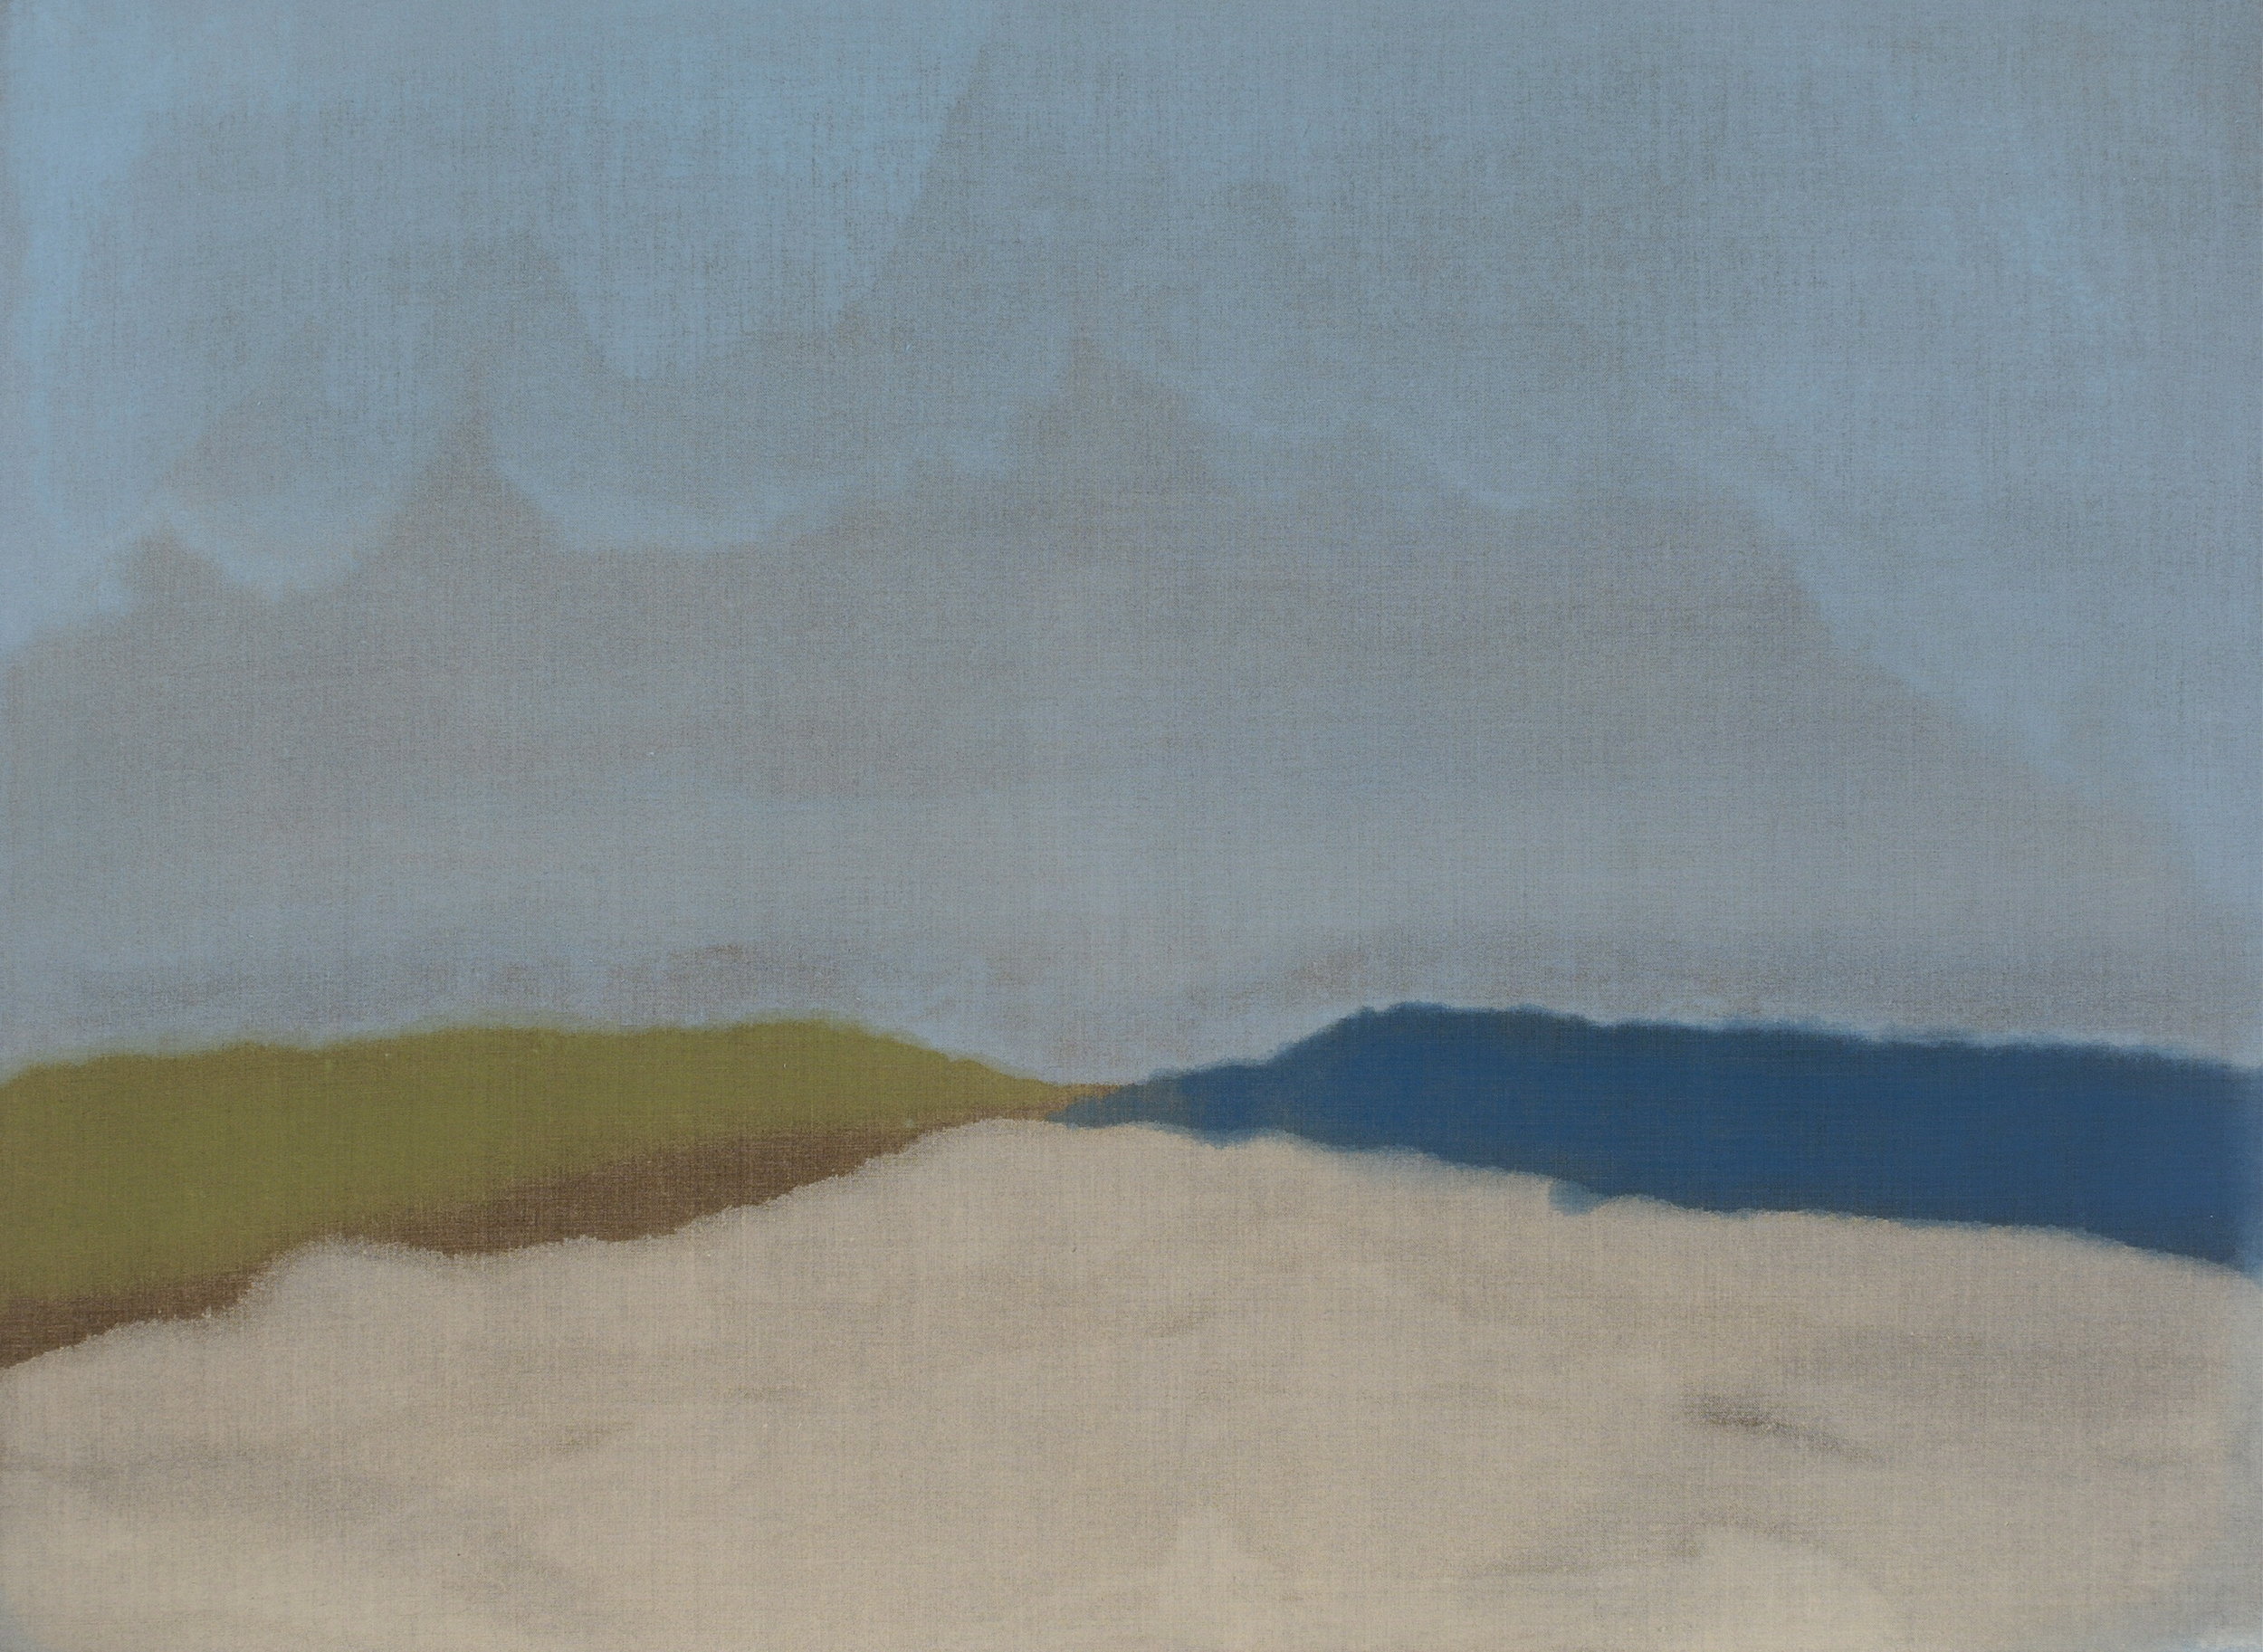  Untitled (No. 2), 2008.  Oil on Linen, 38 x 52 inches. Private Collection. 